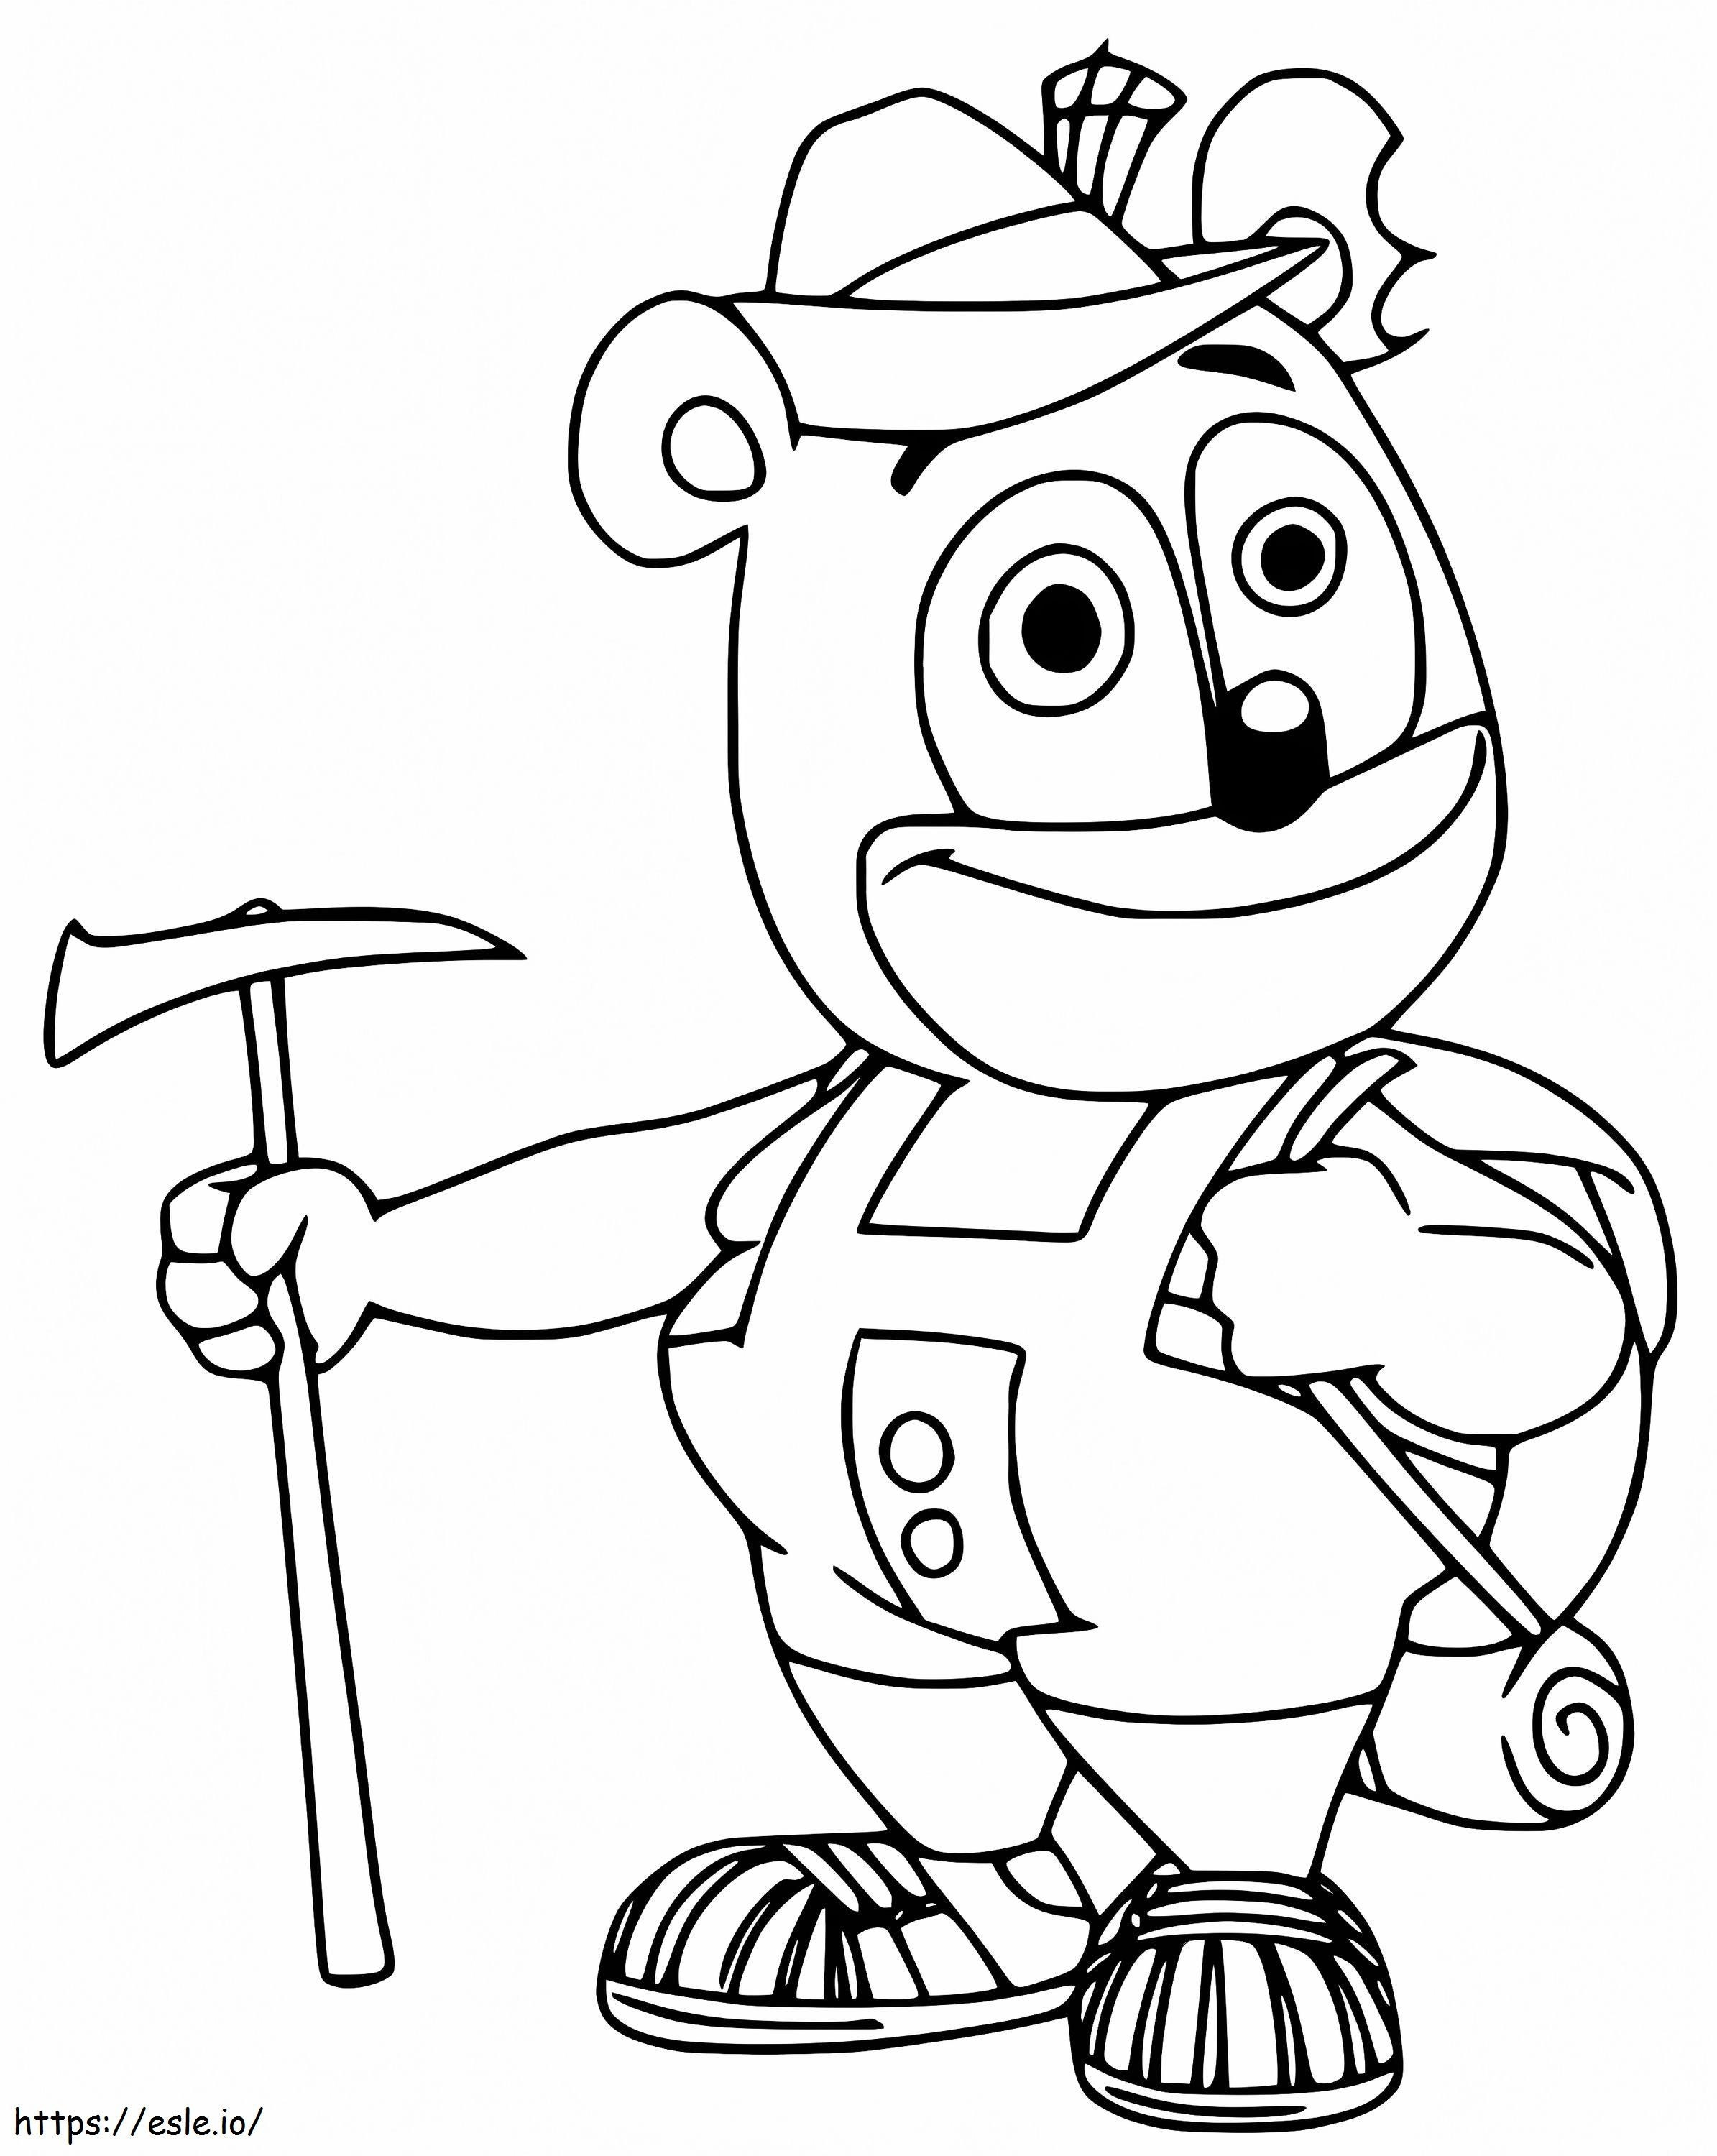 Gummy Bear Smiling coloring page